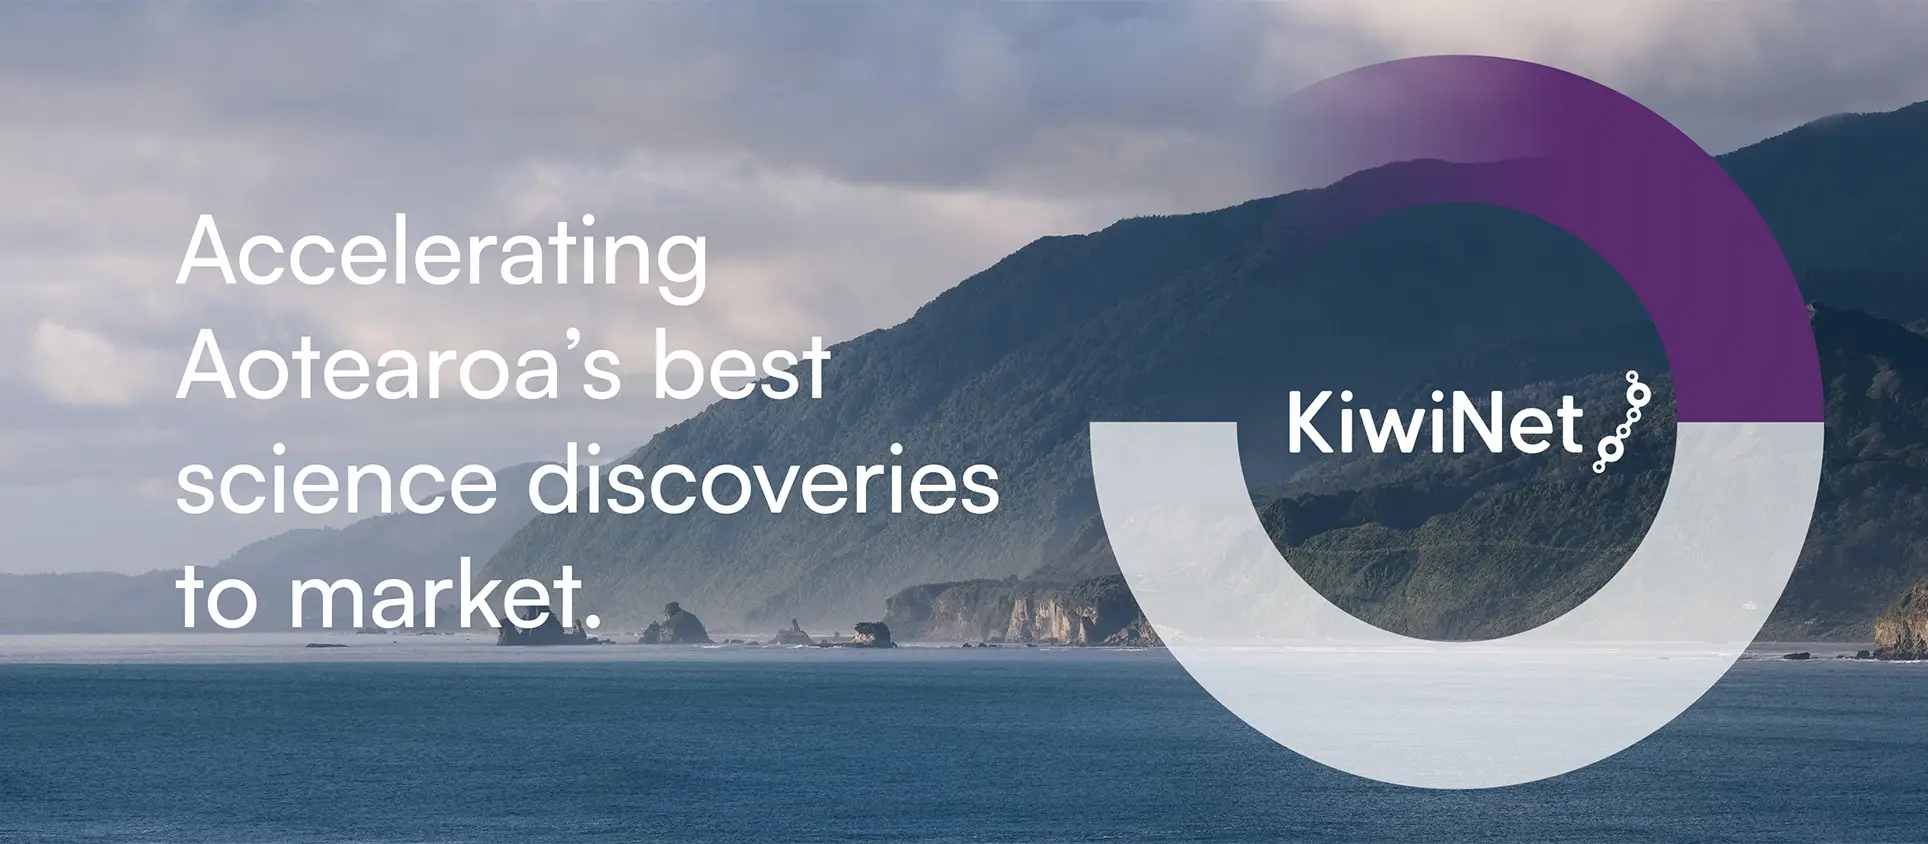 KiwiNet - Accelerating Aotearoa’s best science discoveries to market